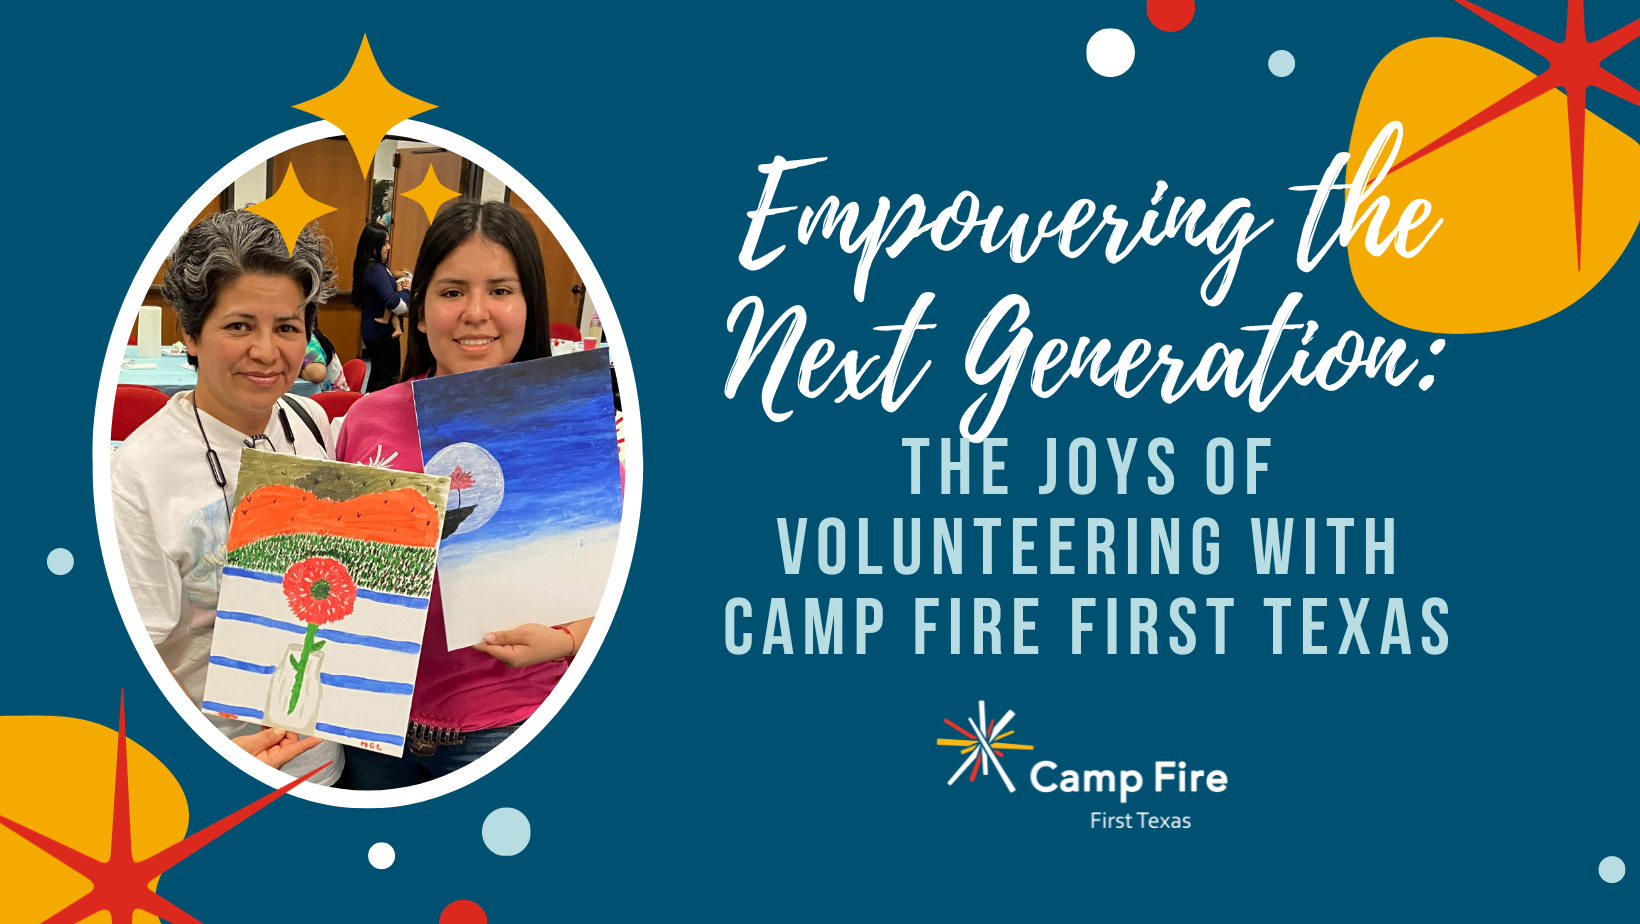 Empowering the Next Generation: The Joys of Volunteering with Camp Fire First Texas, a Camp Fire First Texas blog by Jacob Wright